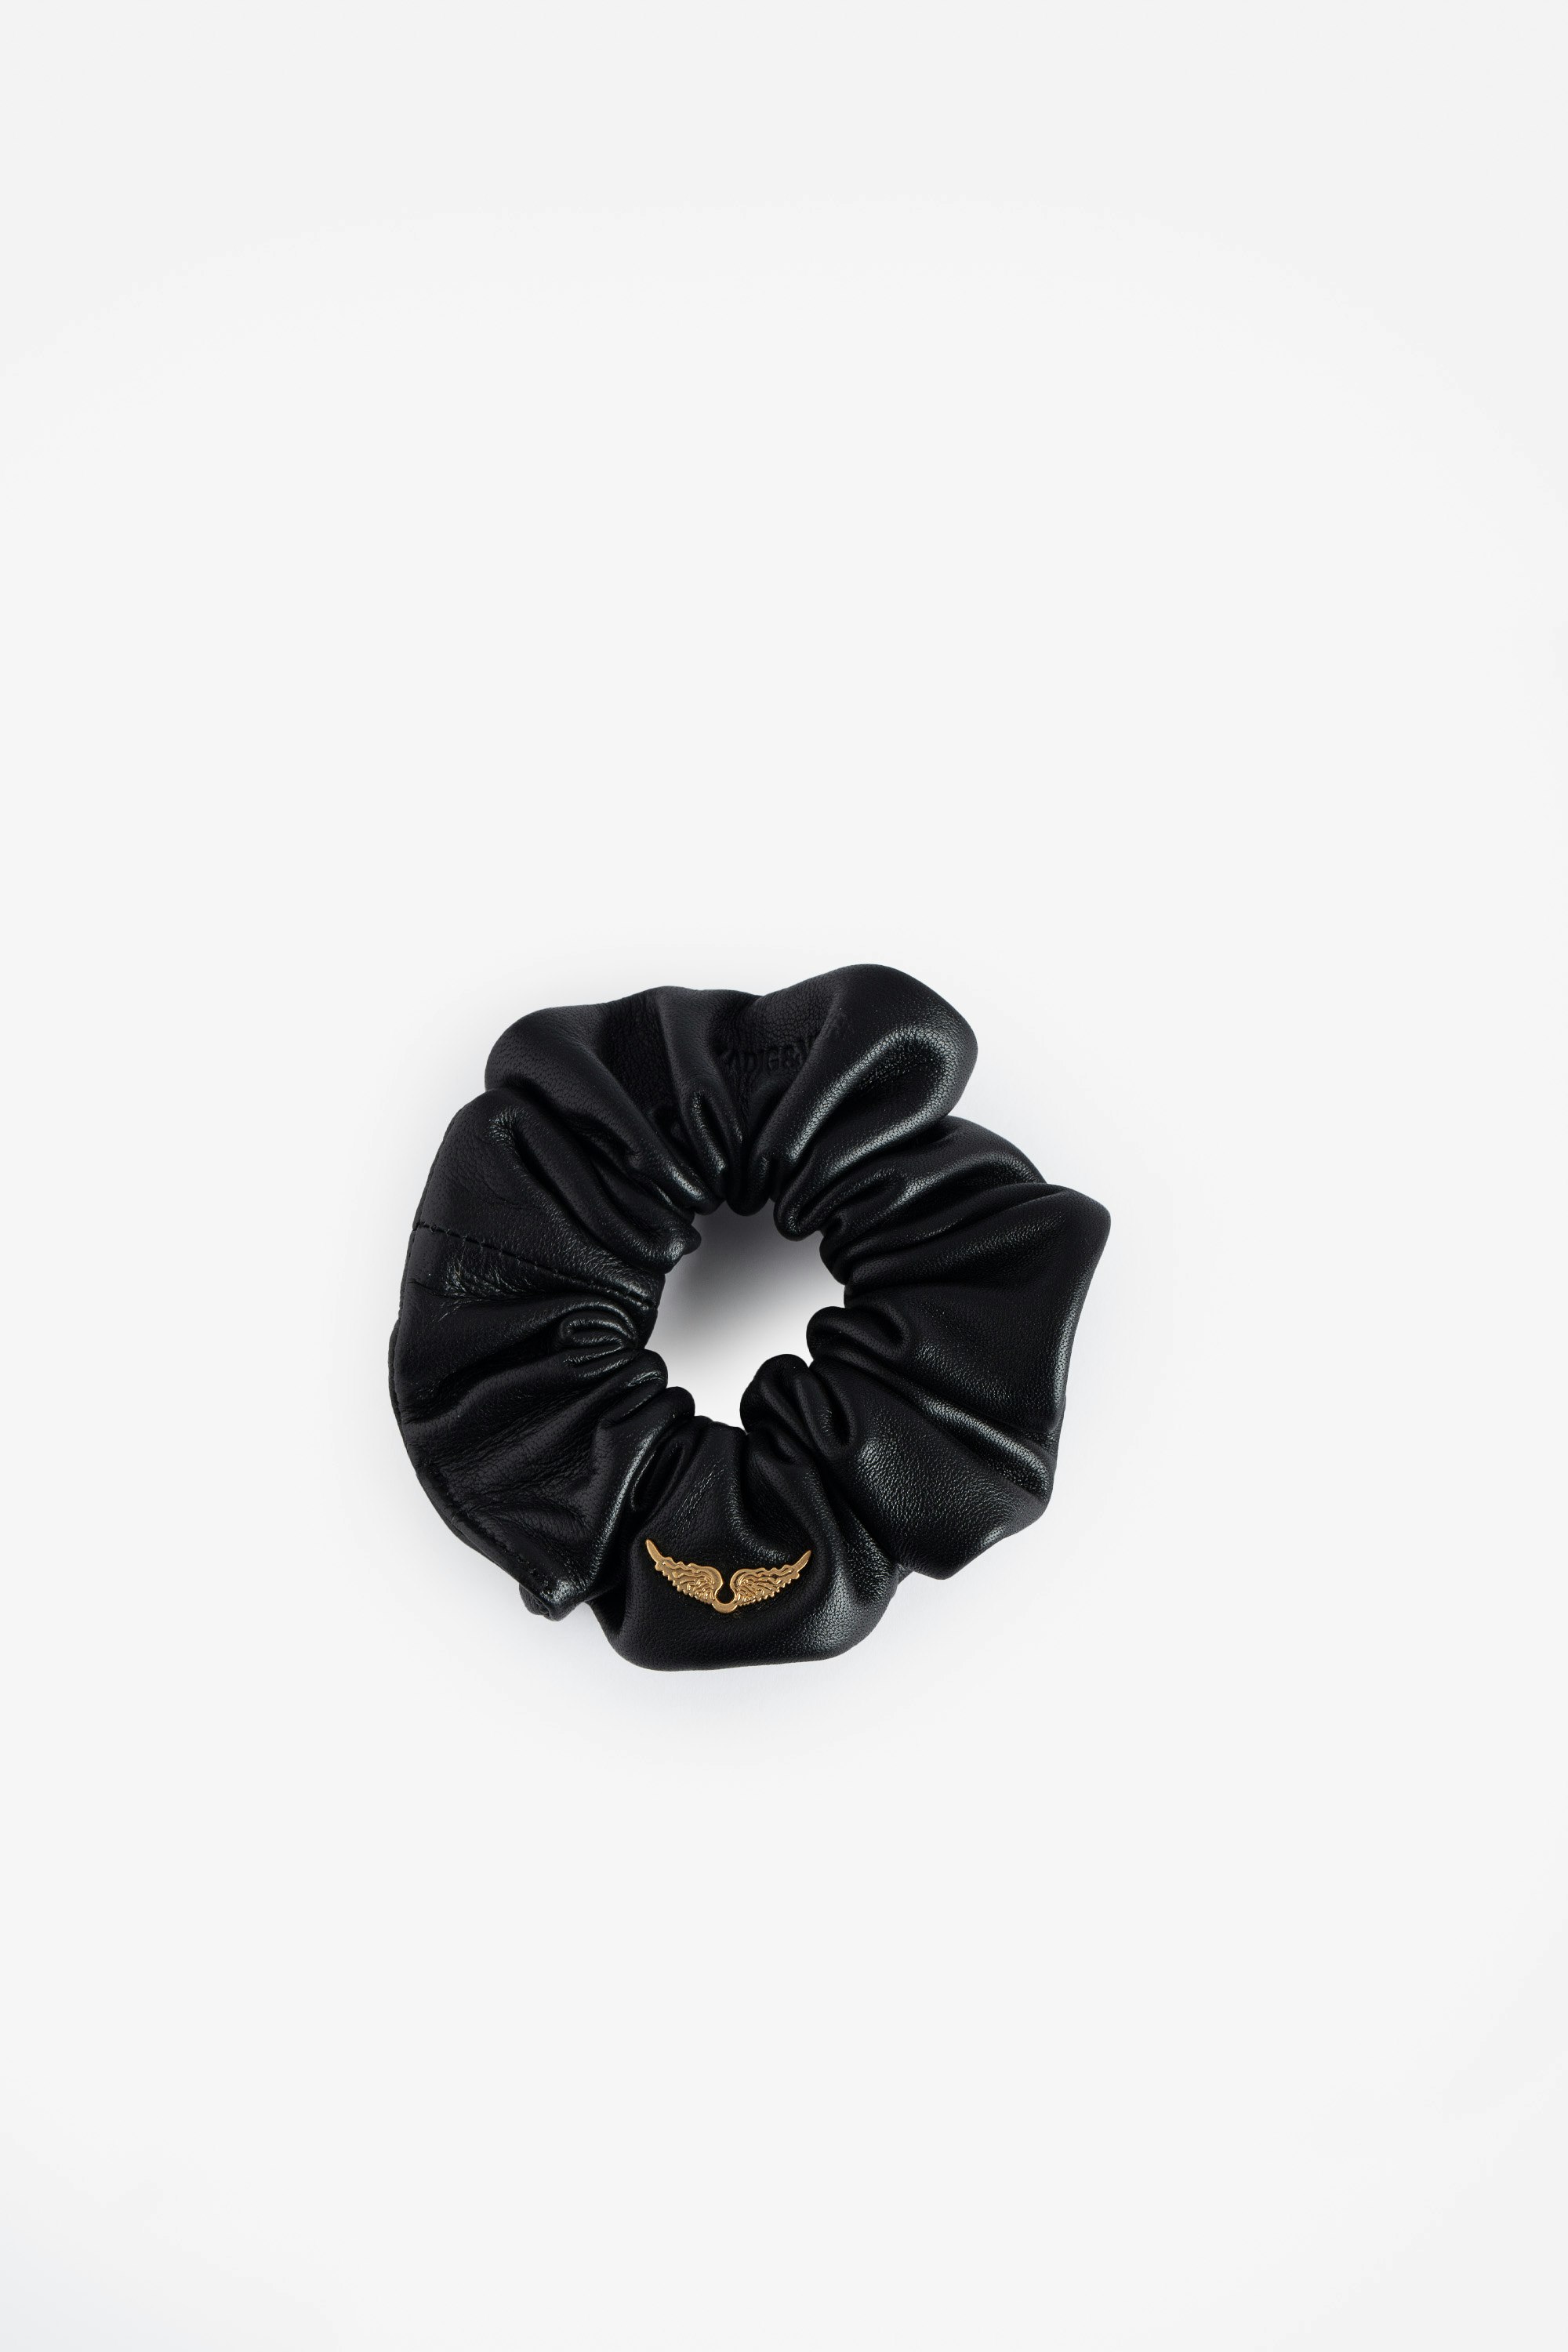 Chouchou Hair Scrunchie - Voltaire Vice black leather hair bobble with wings motif.